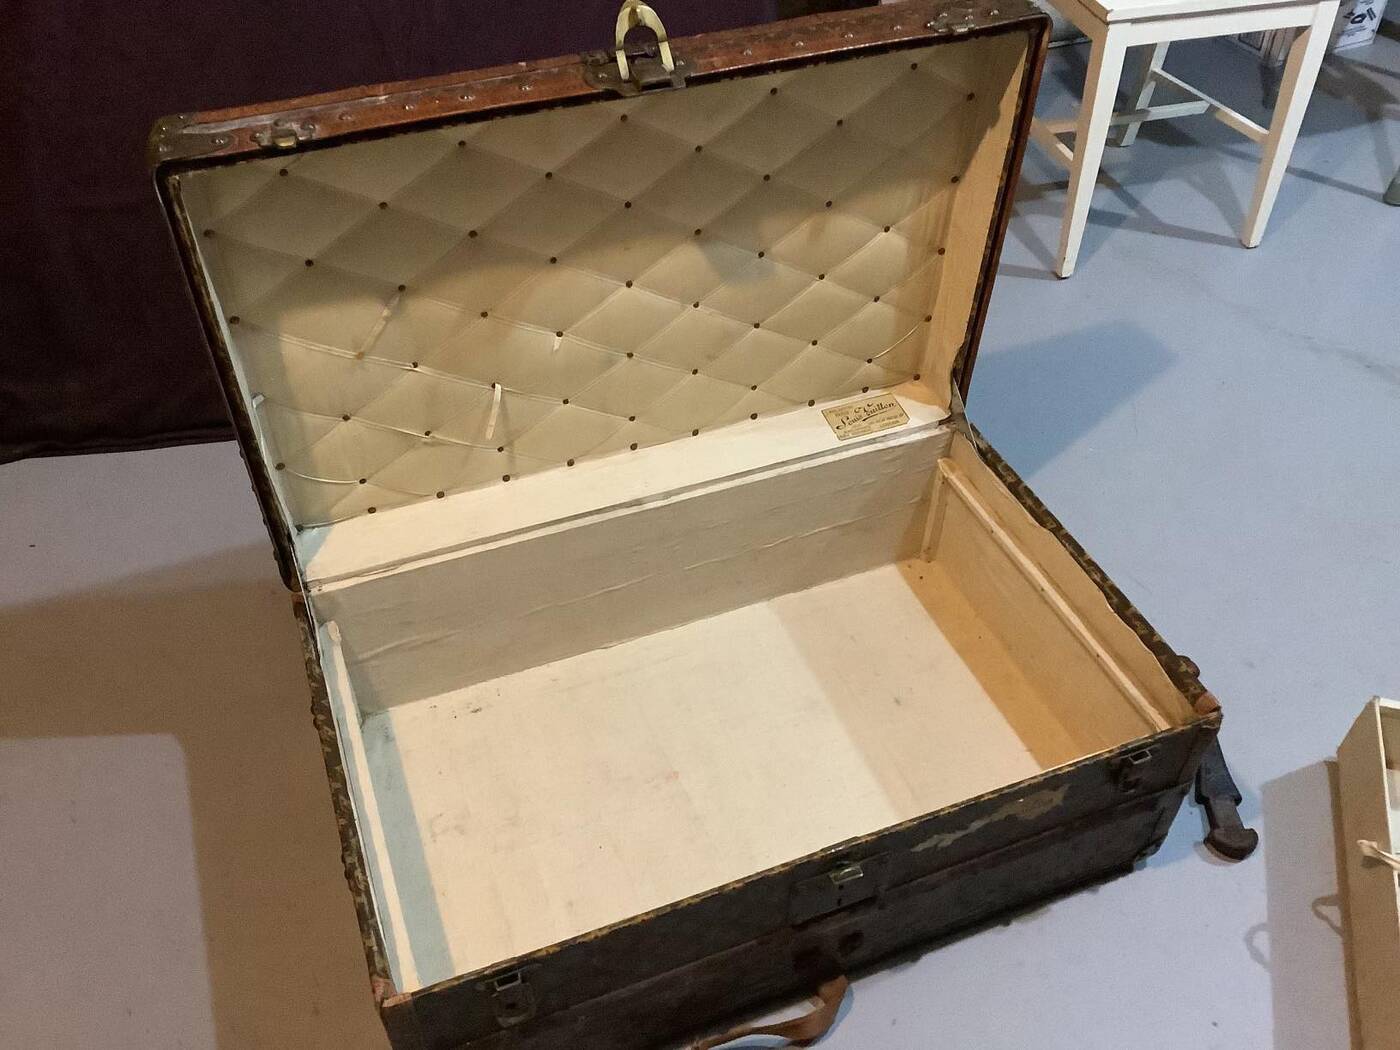 Antiques Roadshow guest stunned to learn value of Louis Vuitton trunk  picked up for £12 after genius move